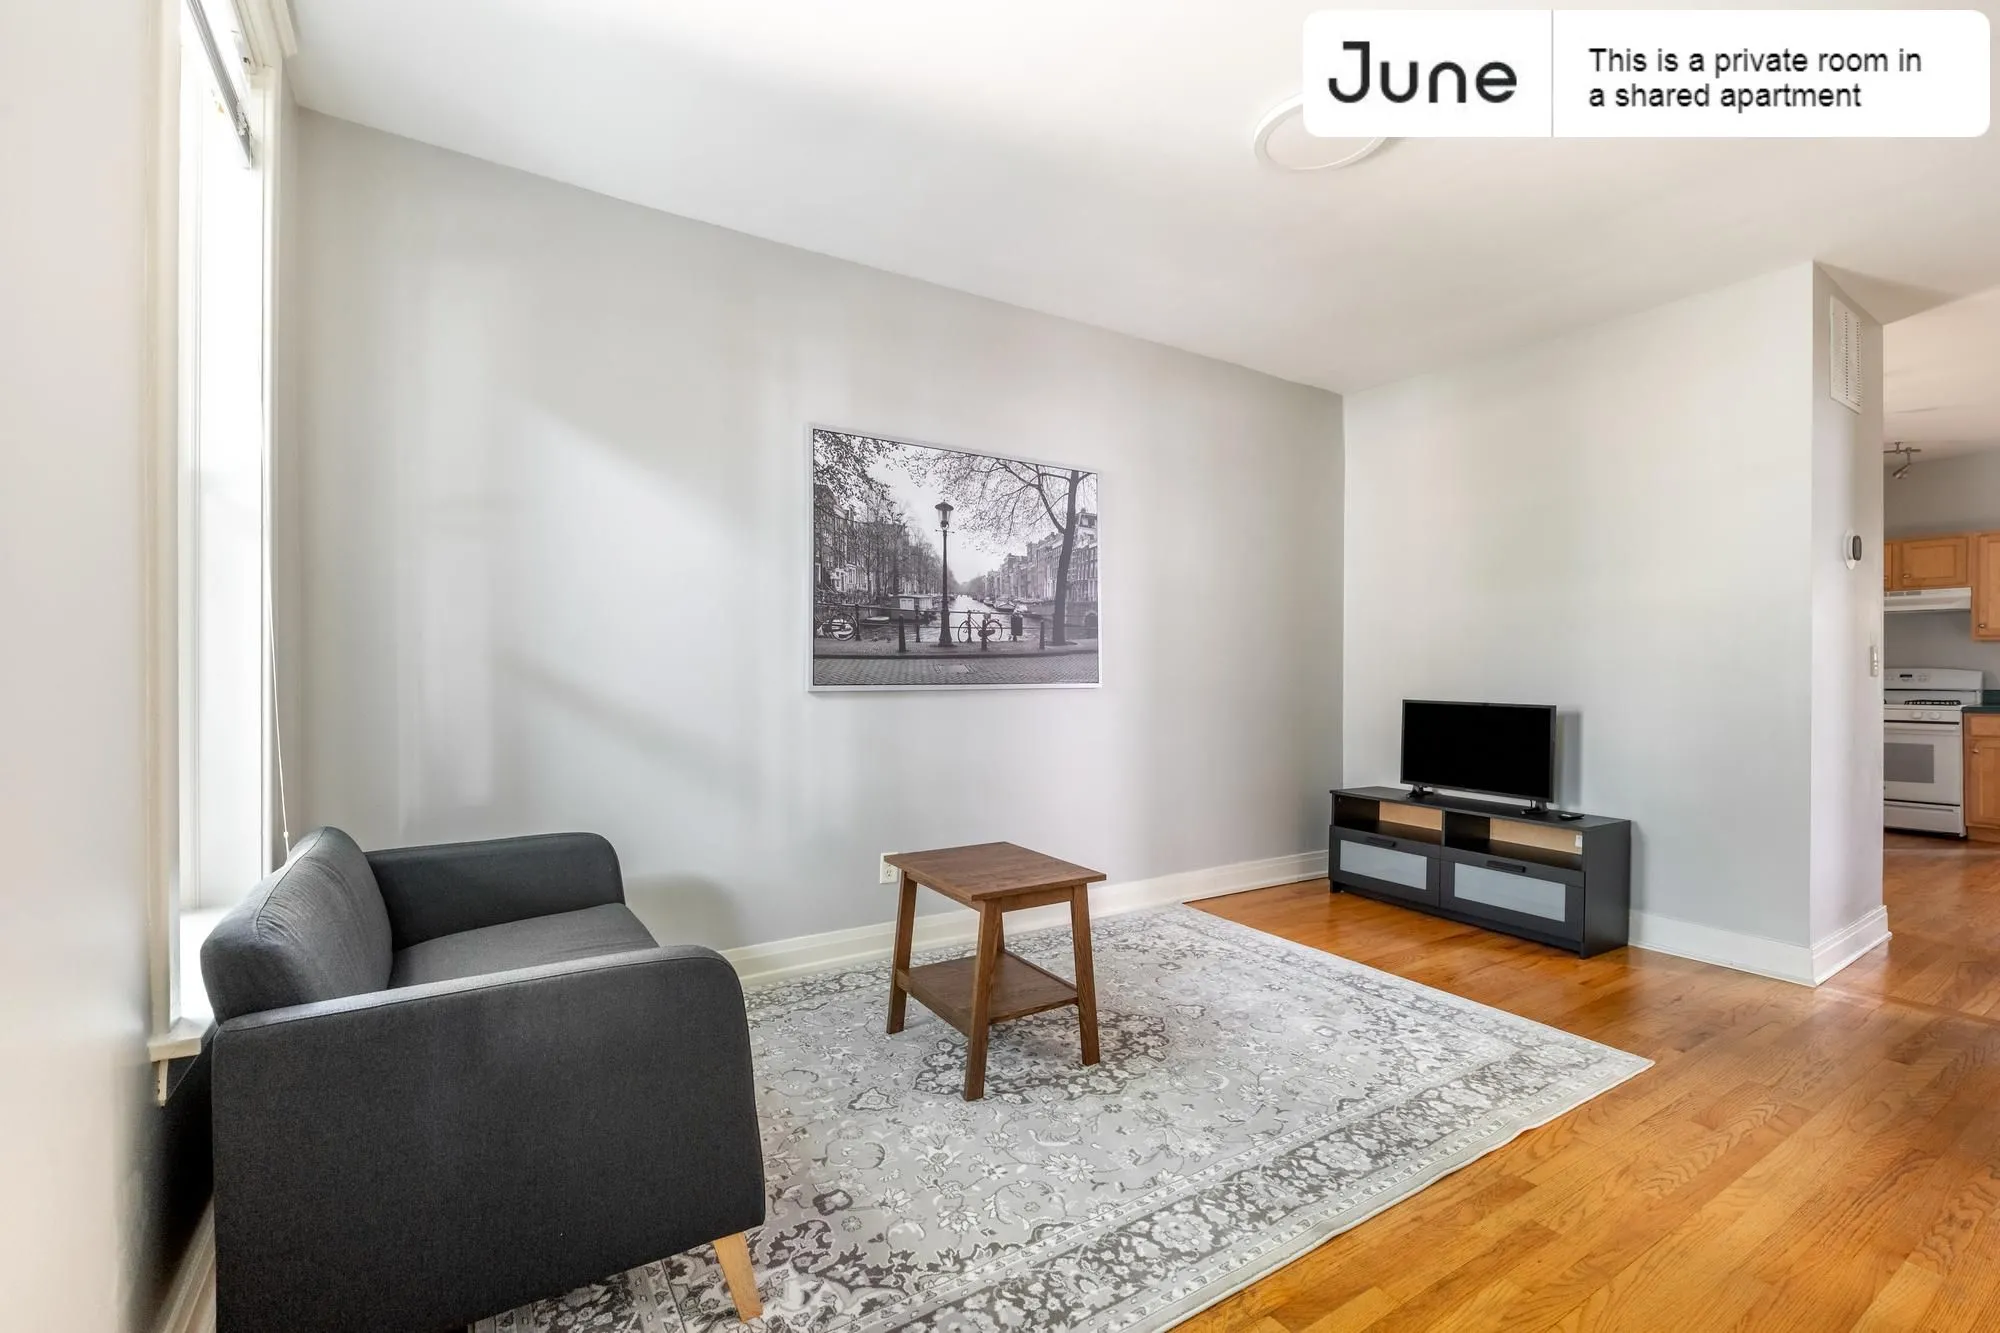 2321 W BARRY AVE 60618-Room For Rent-unit#Apt1-Chicago-IL